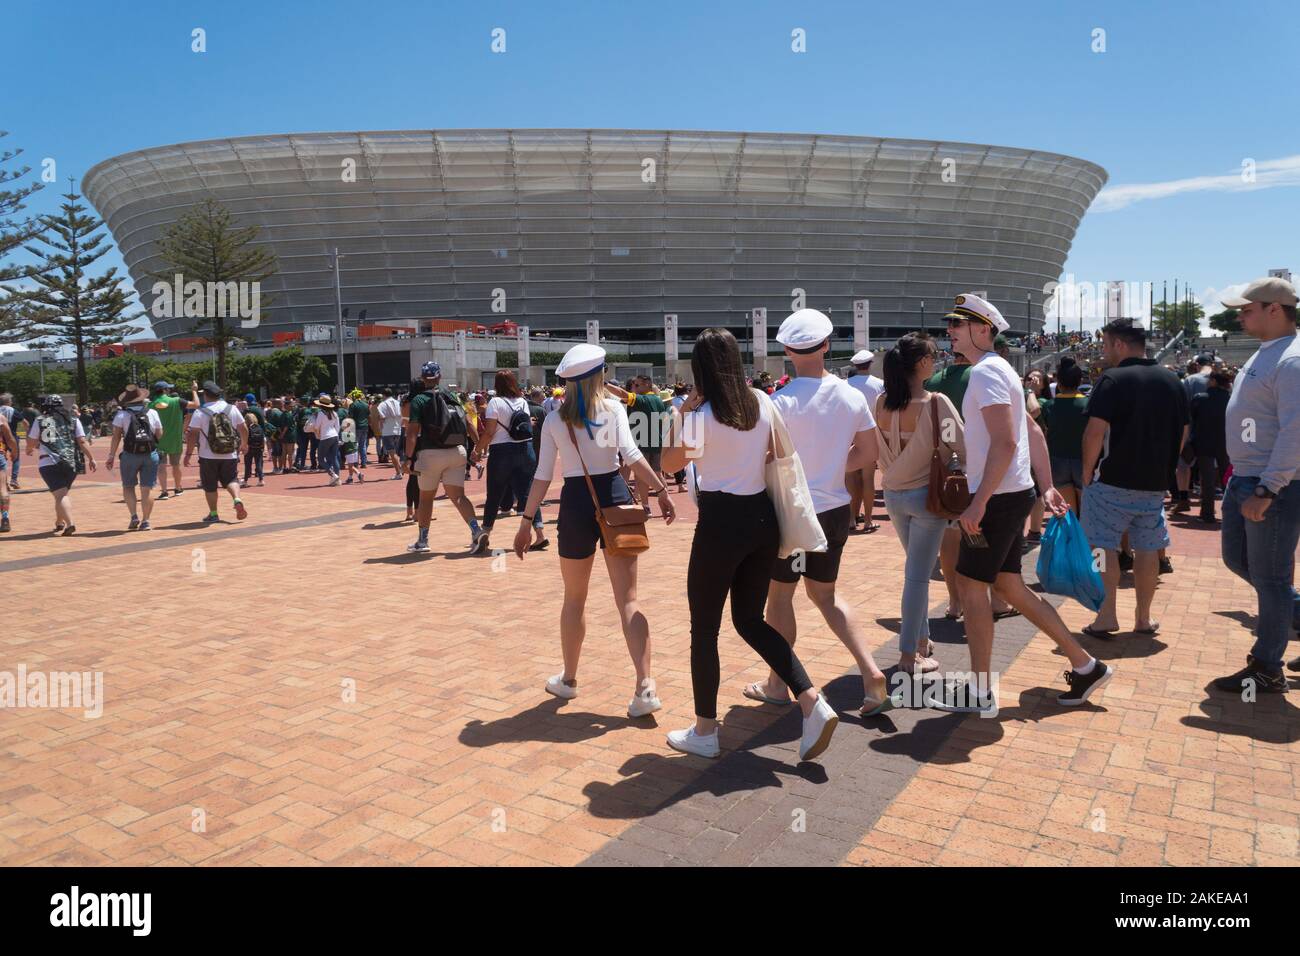 Cape Town stadium, Green Point, South Africa where crowds of people arrive to support their team during the rugby sevens tournament or sports event Stock Photo